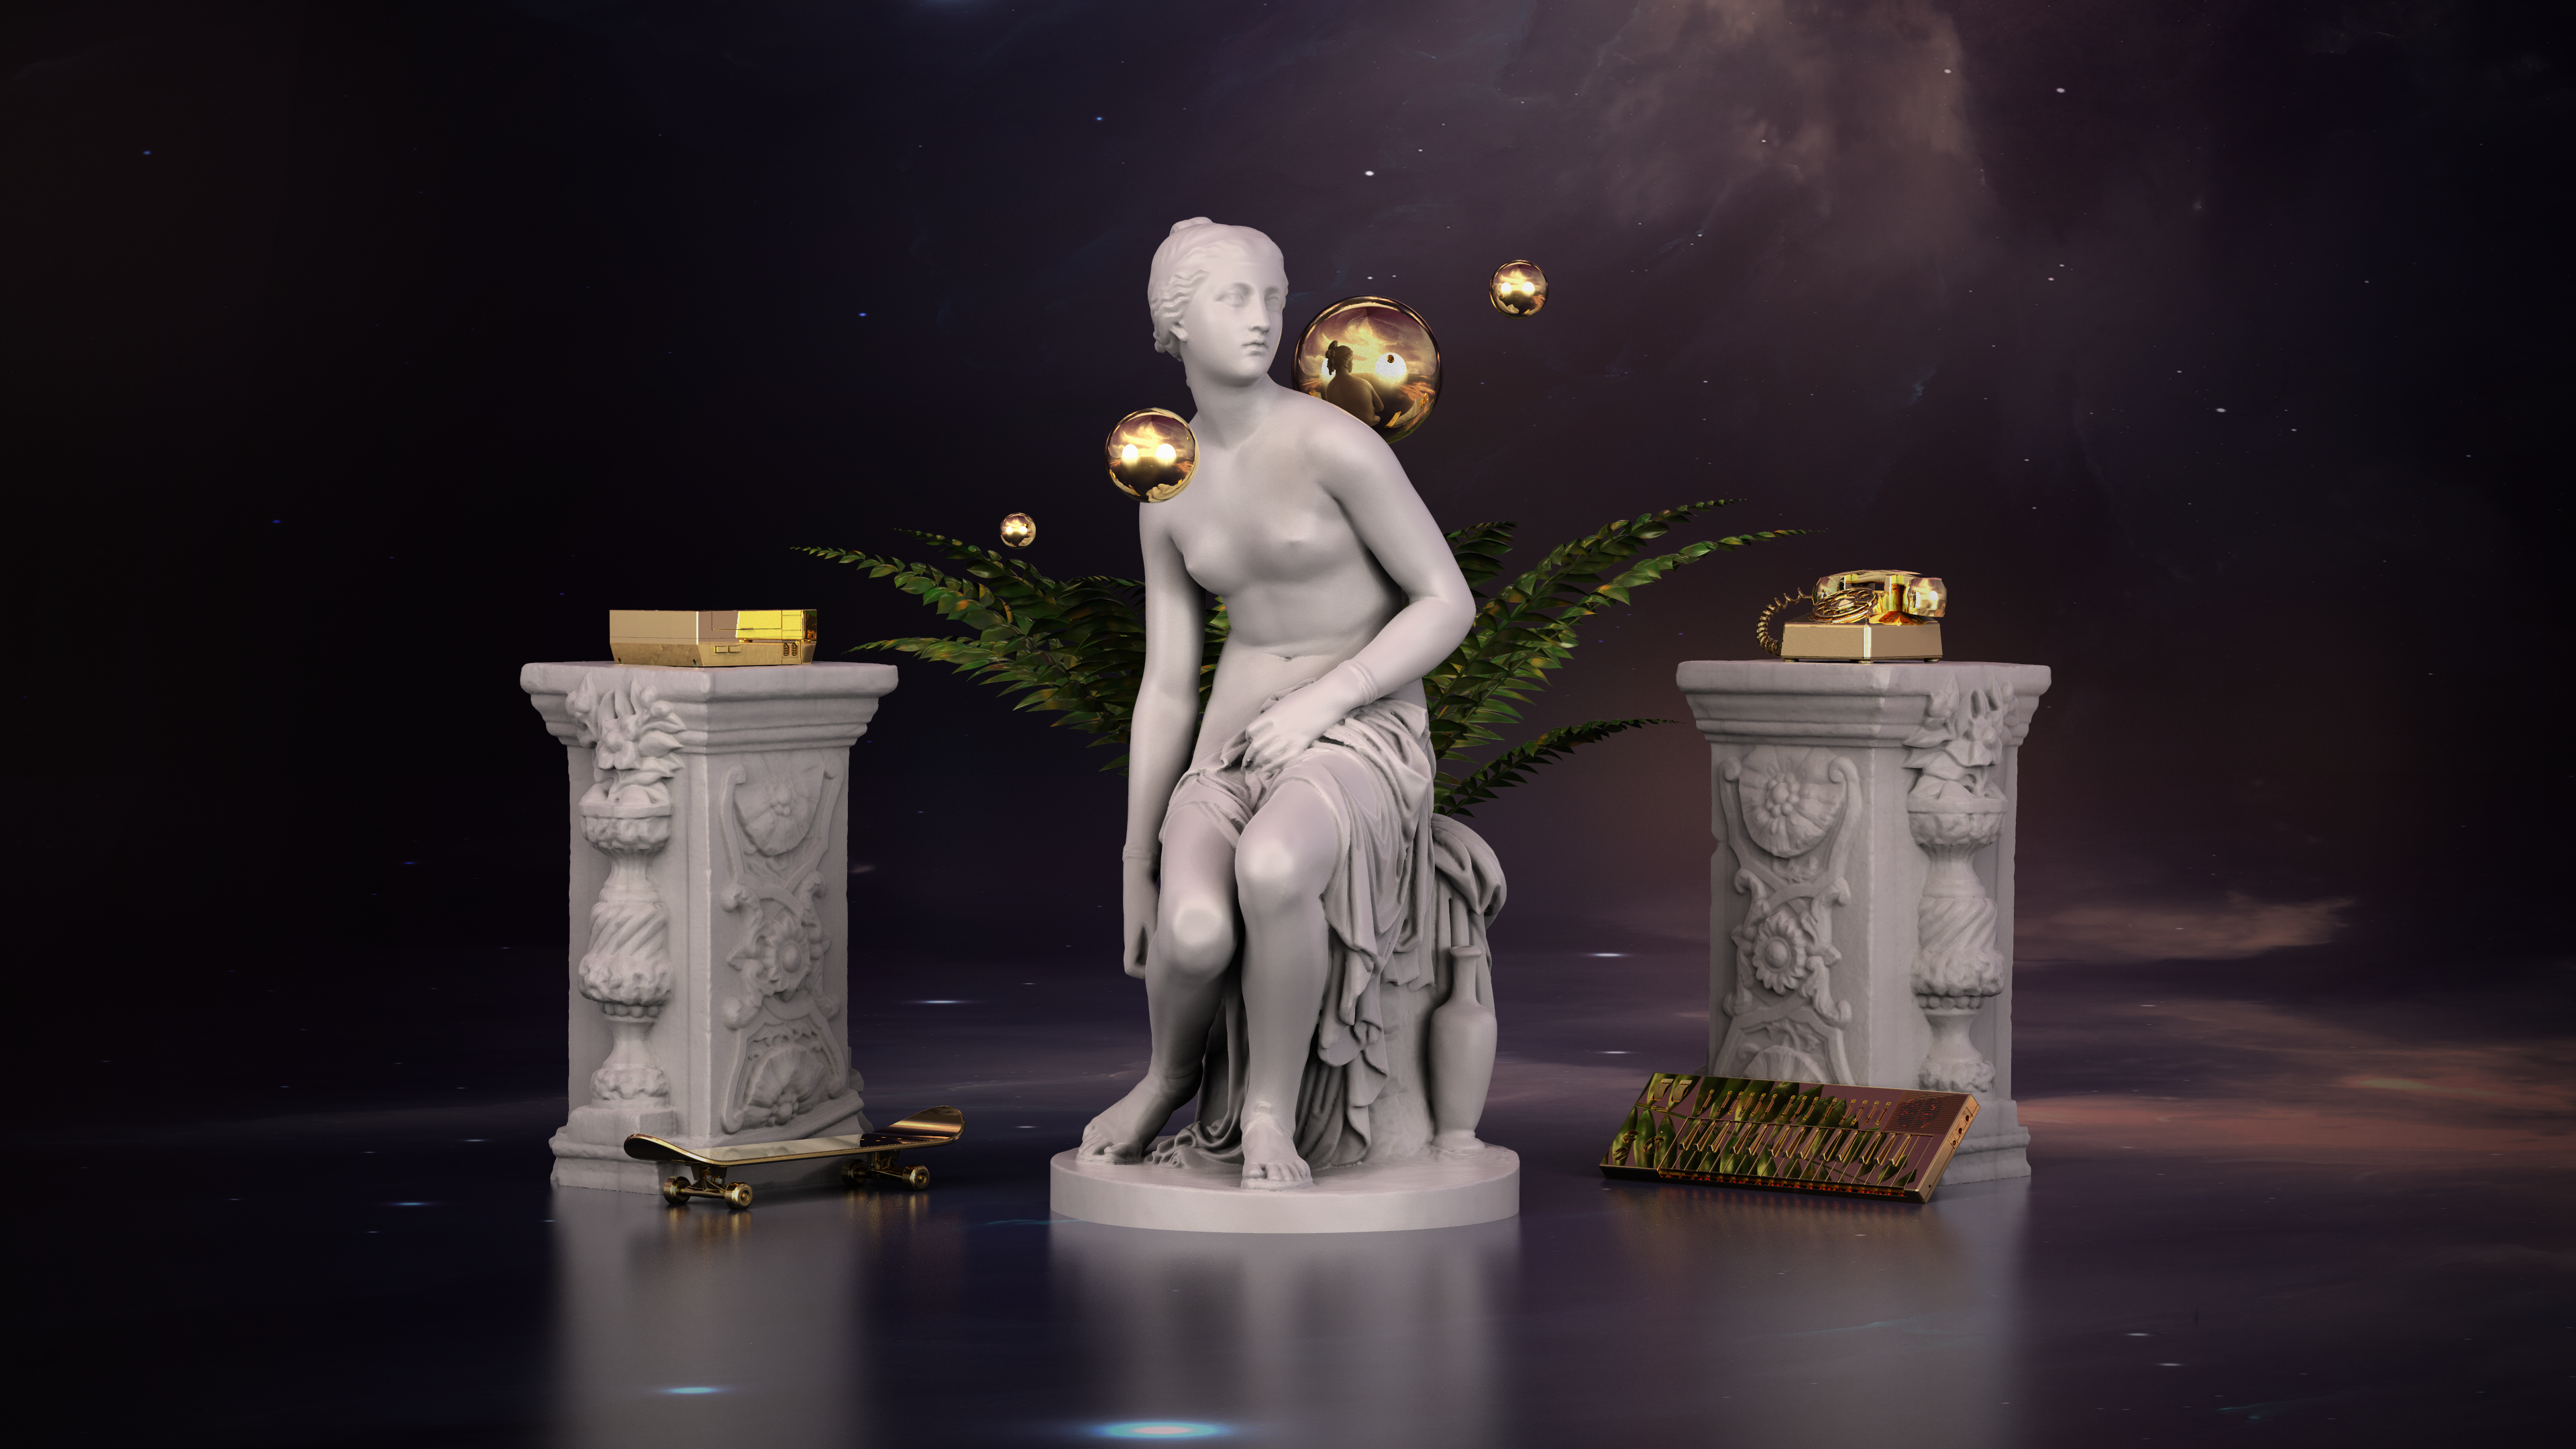 3D Space Marble Gold Nintendo Entertainment System Skateboard Piano Synth Phone Statue Ferns 3840x2160